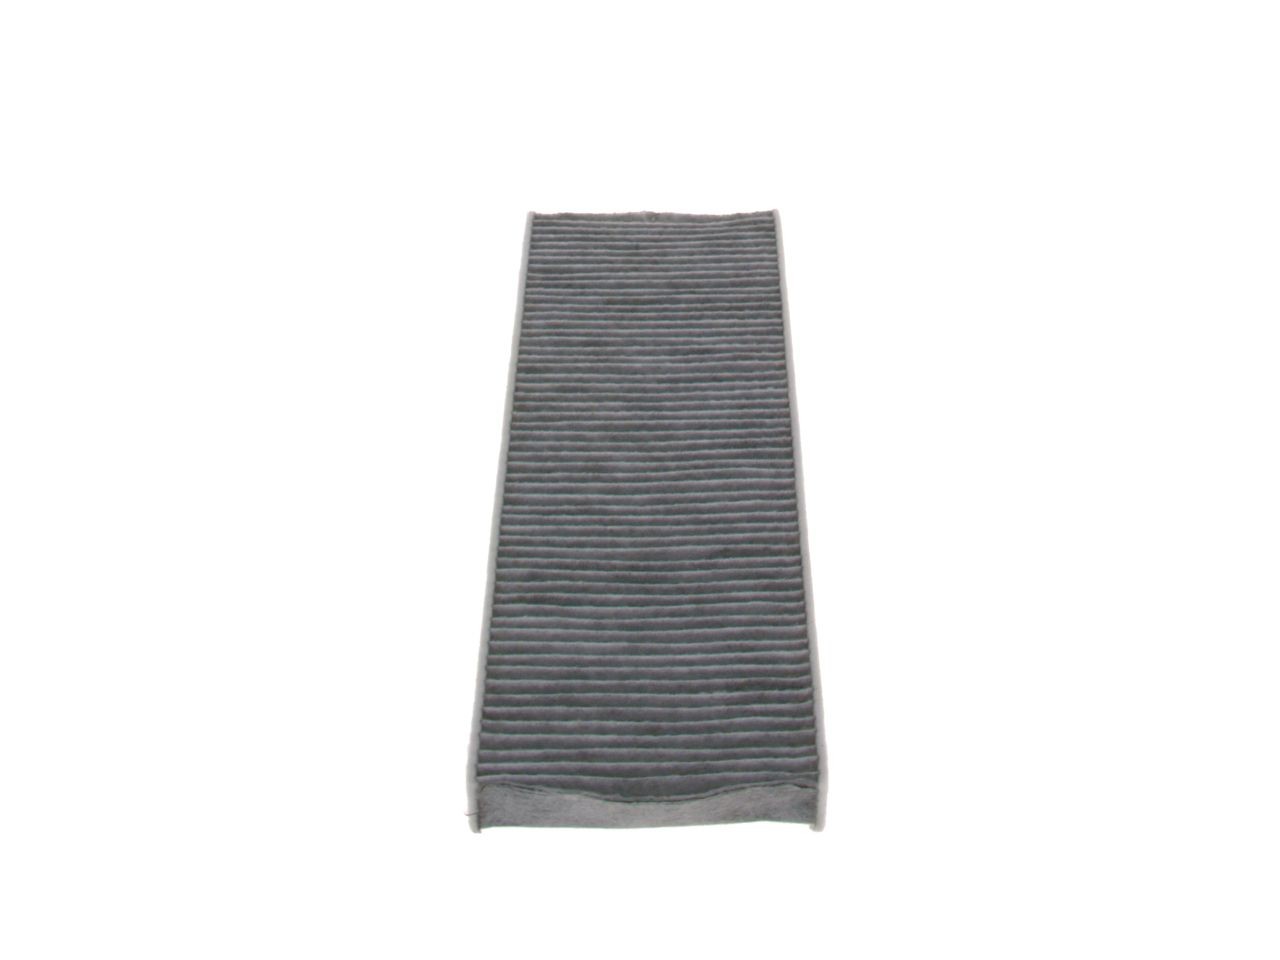 1987435606 Air con filter R 5606 BOSCH Activated Carbon Filter, 448 mm x 151 mm x 31 mm